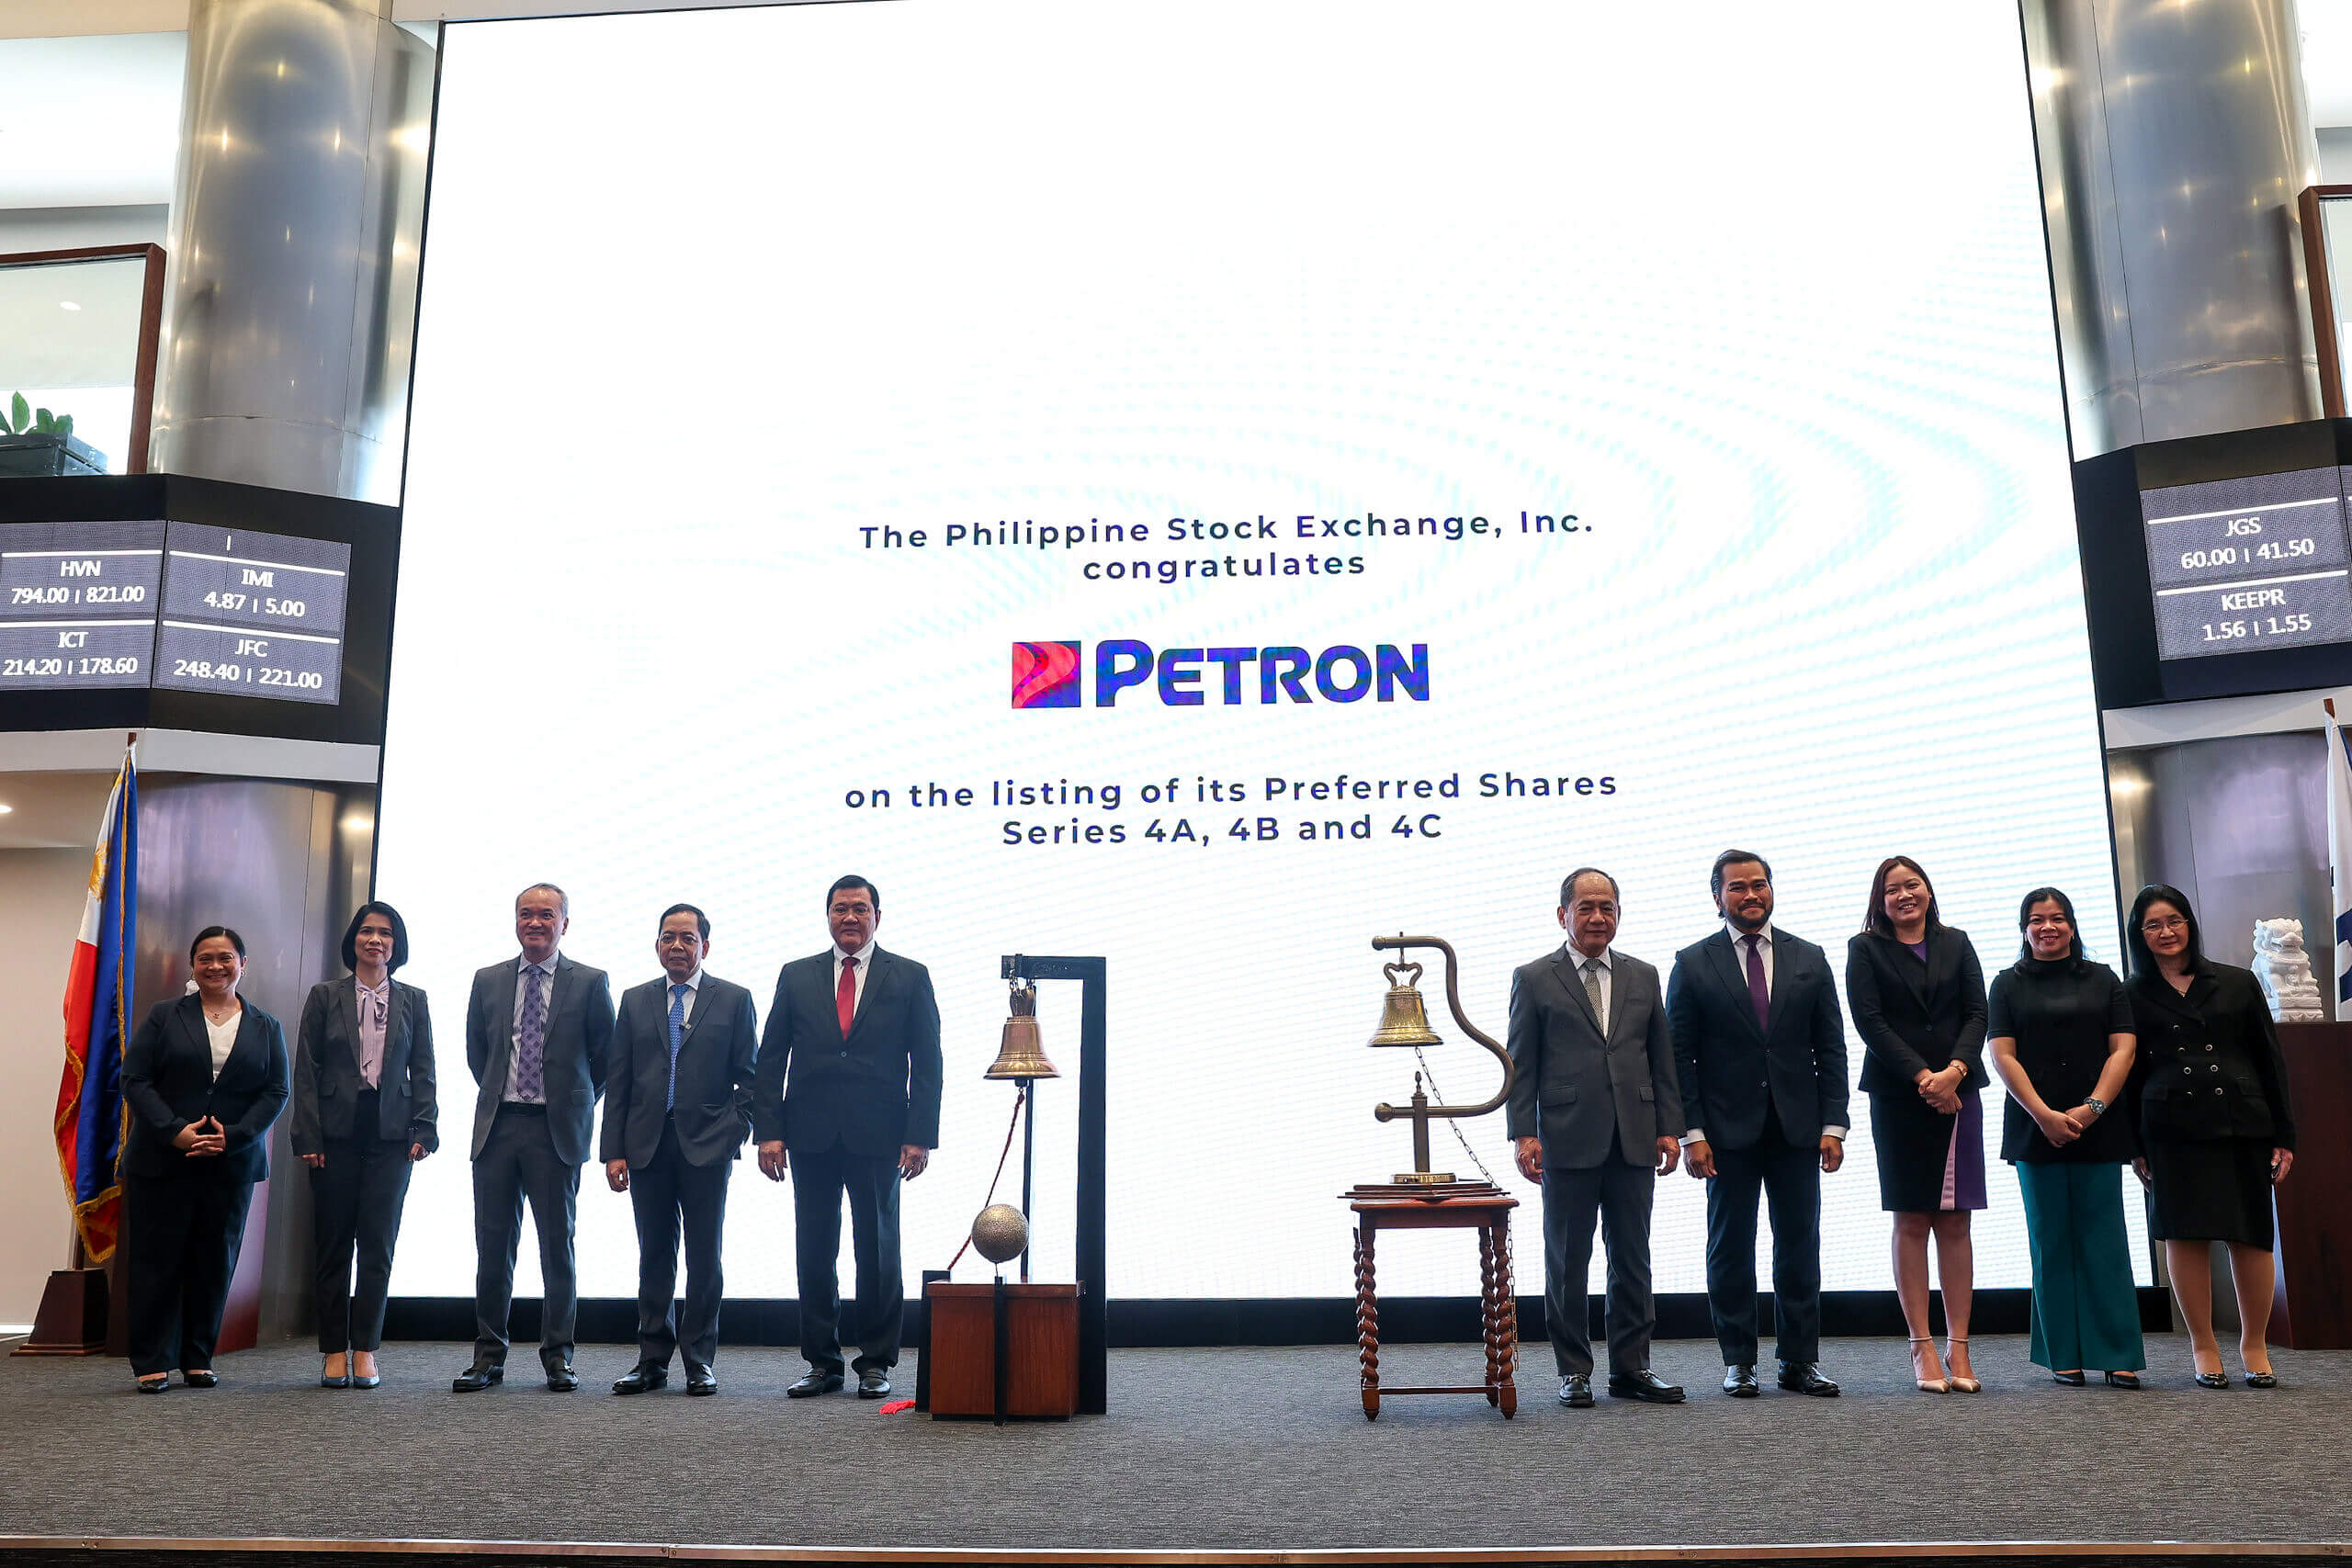 Petron’s Perpetual Preferred Shares offering raises P14B